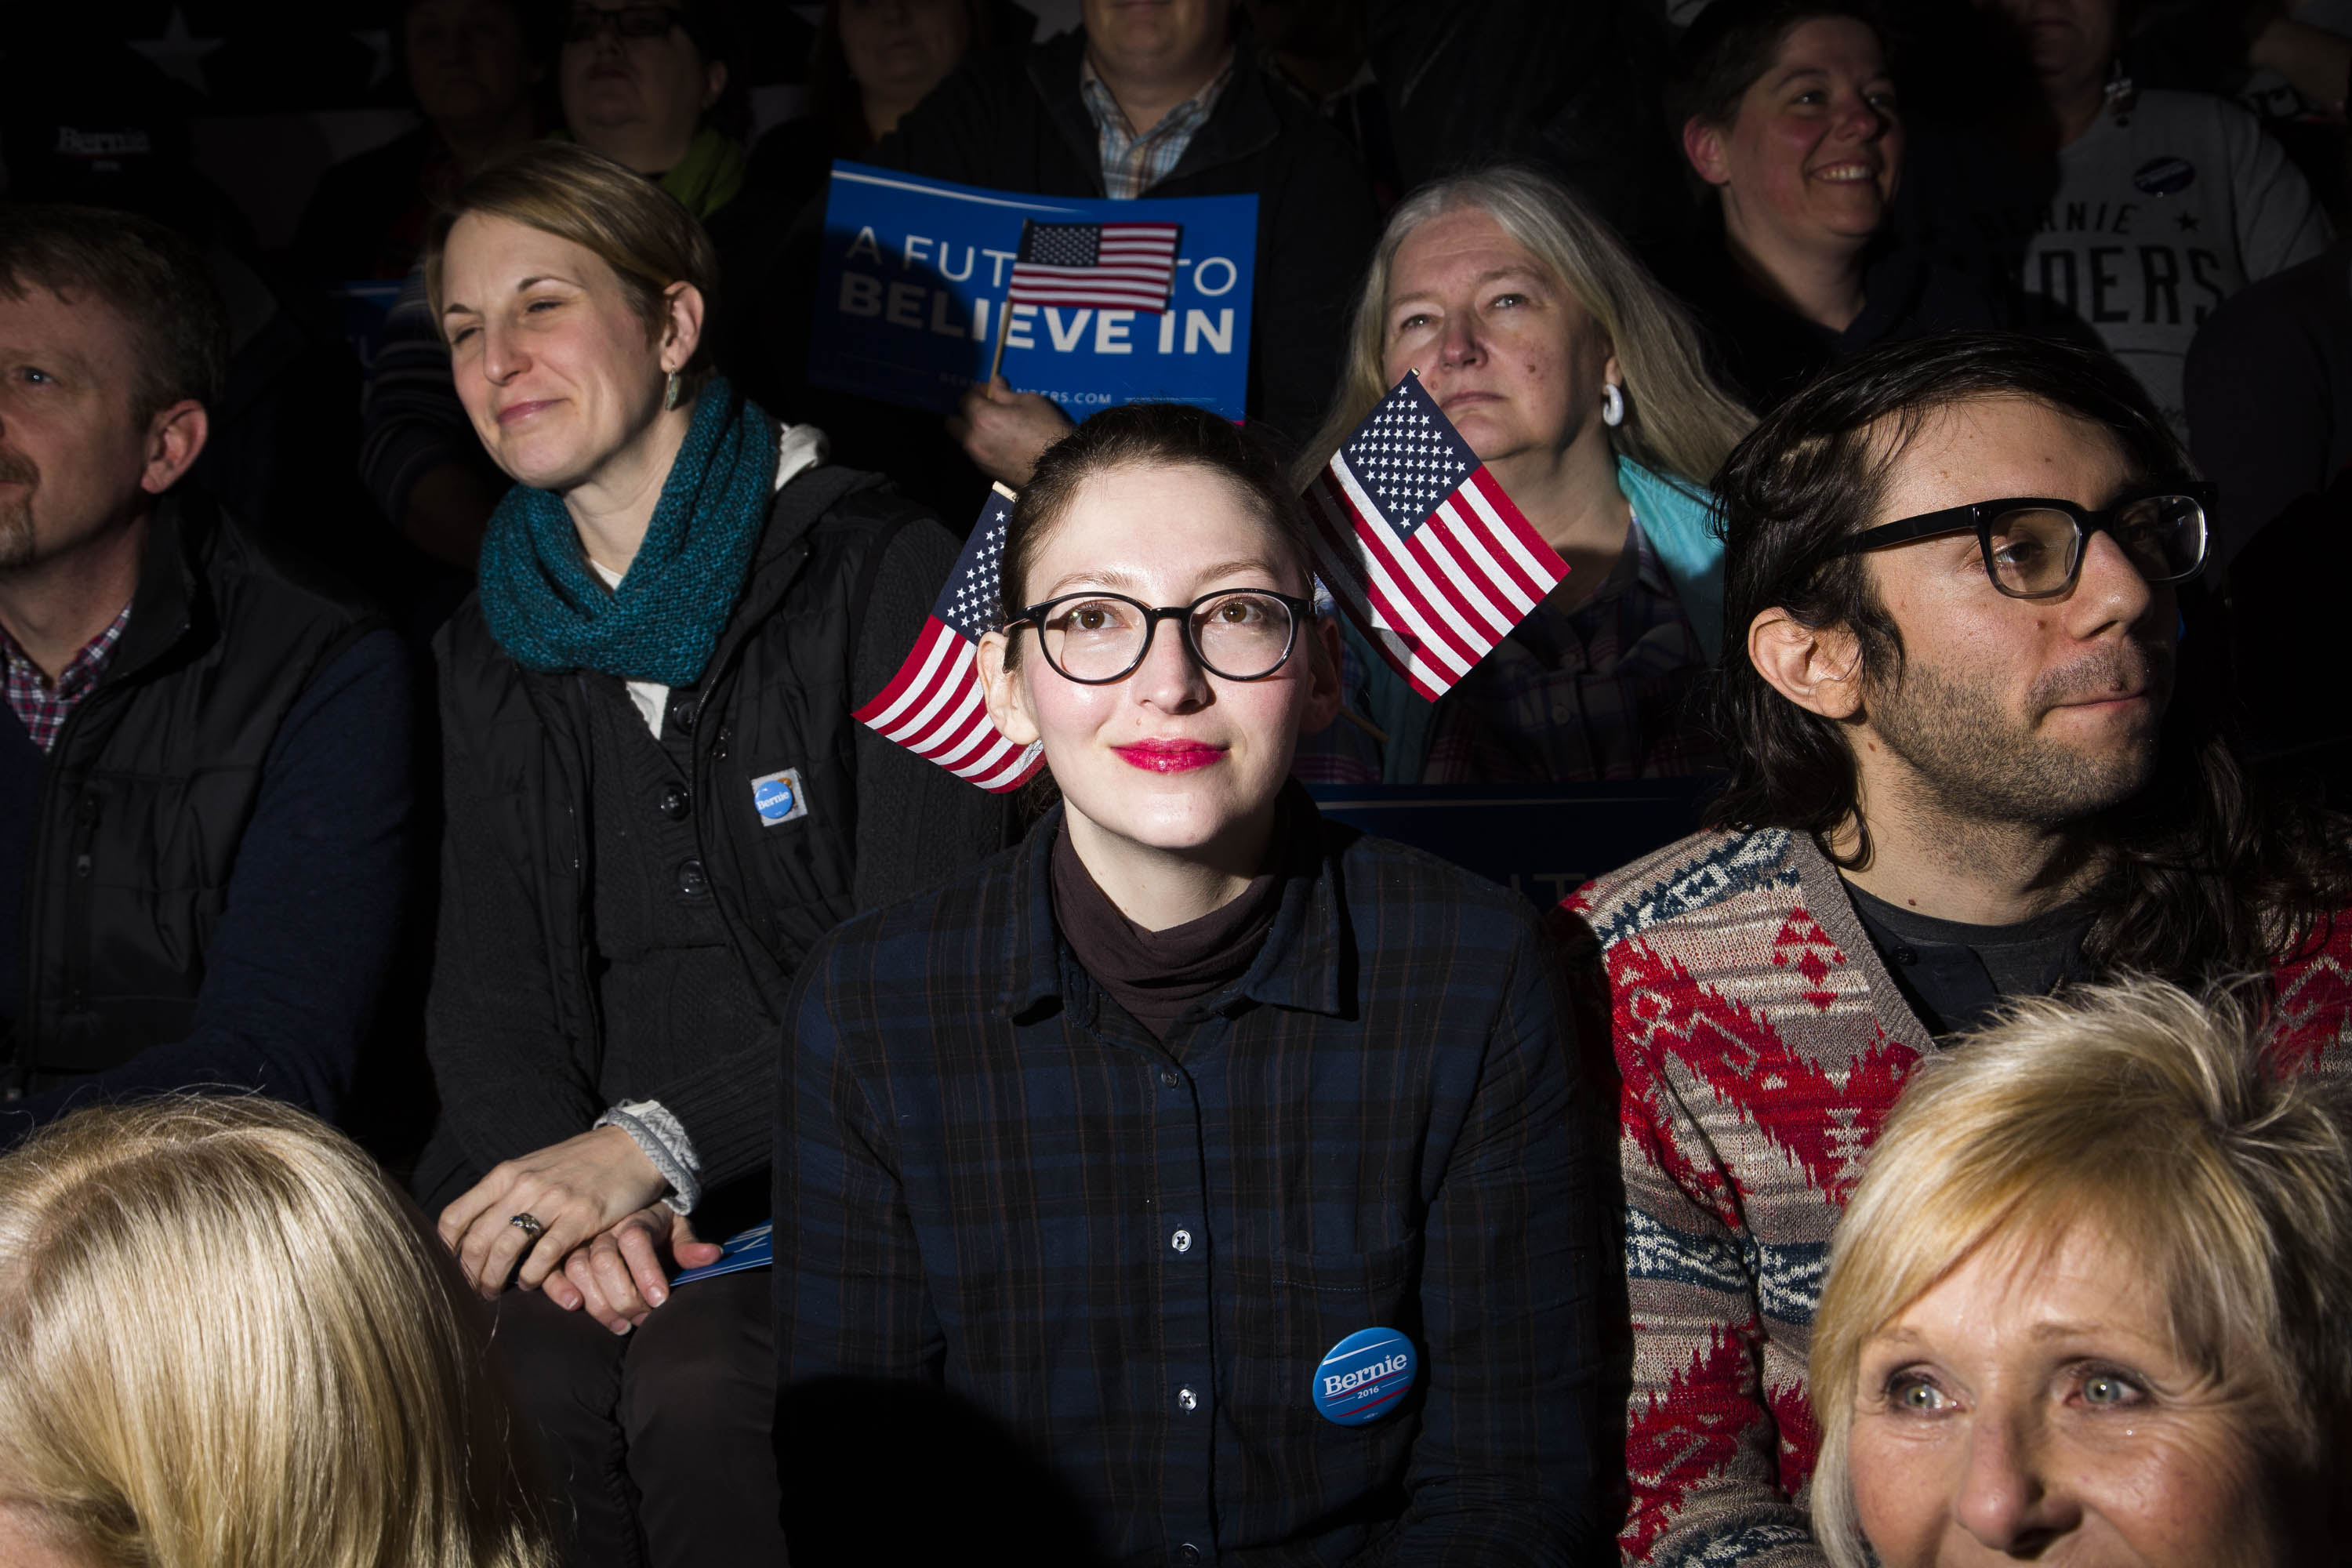 Anjuli Willmer sports double flags at a New Hampshire primary night rally for Democratic presidential candidate, Vermont Sen. Bernie Sanders at Concord High School on Tuesday, Feb.  9, 2016, in Concord, N.H. (Landon Nordeman for TIME)